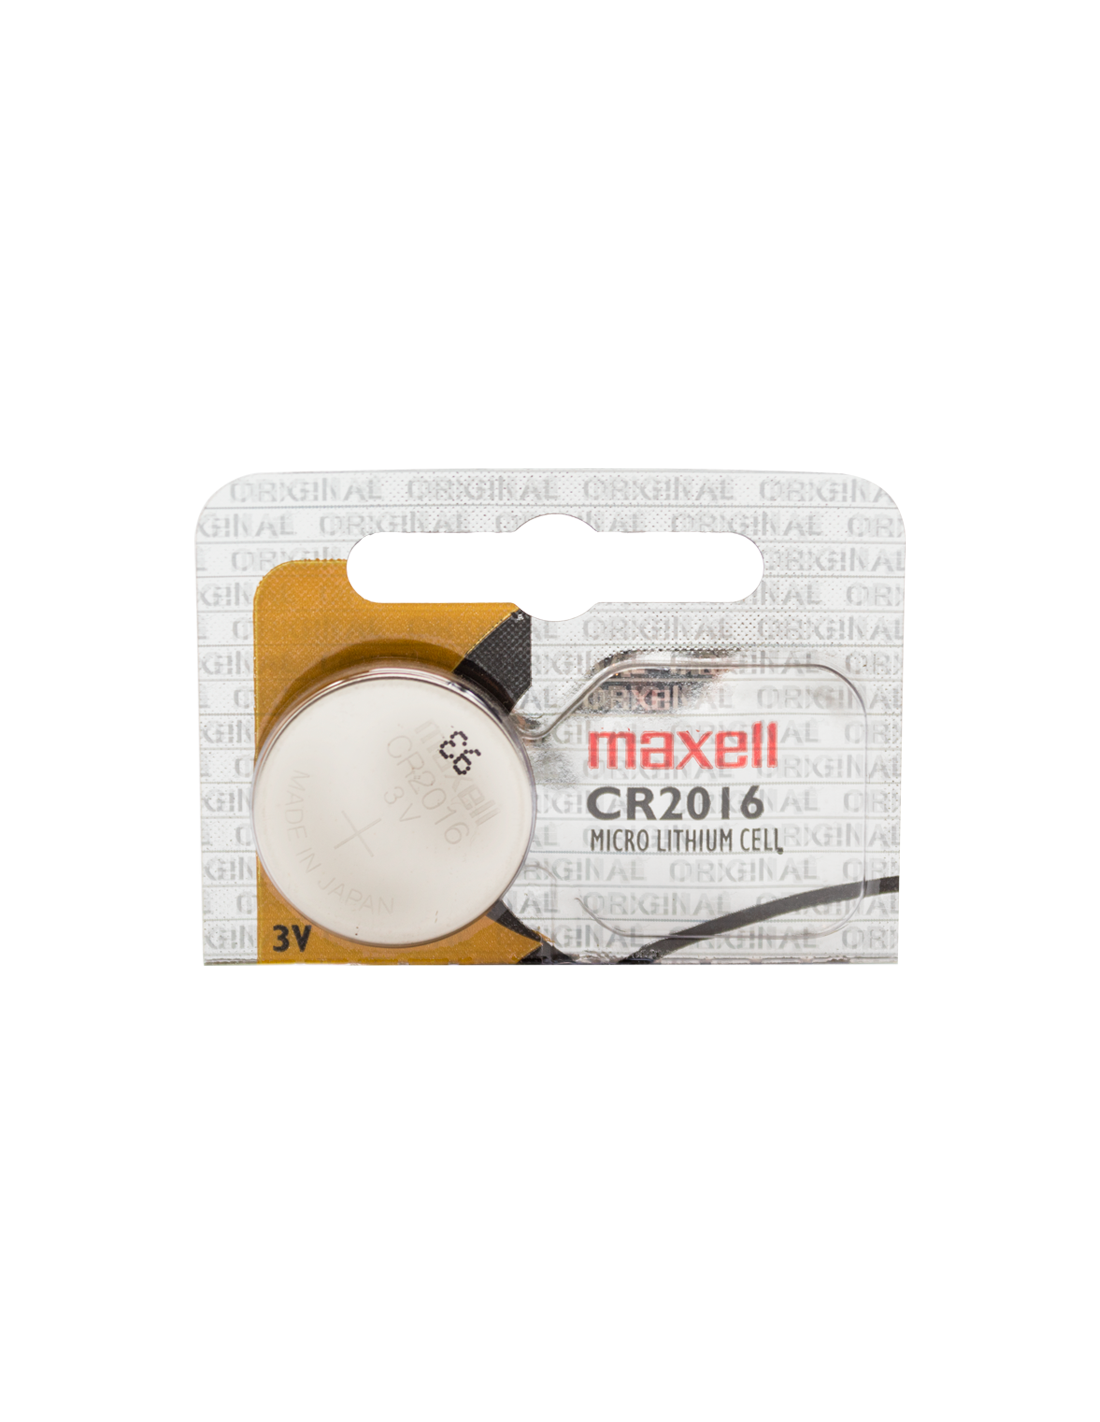 PILA CR2016 MAXELL – Ctronic Security C.A